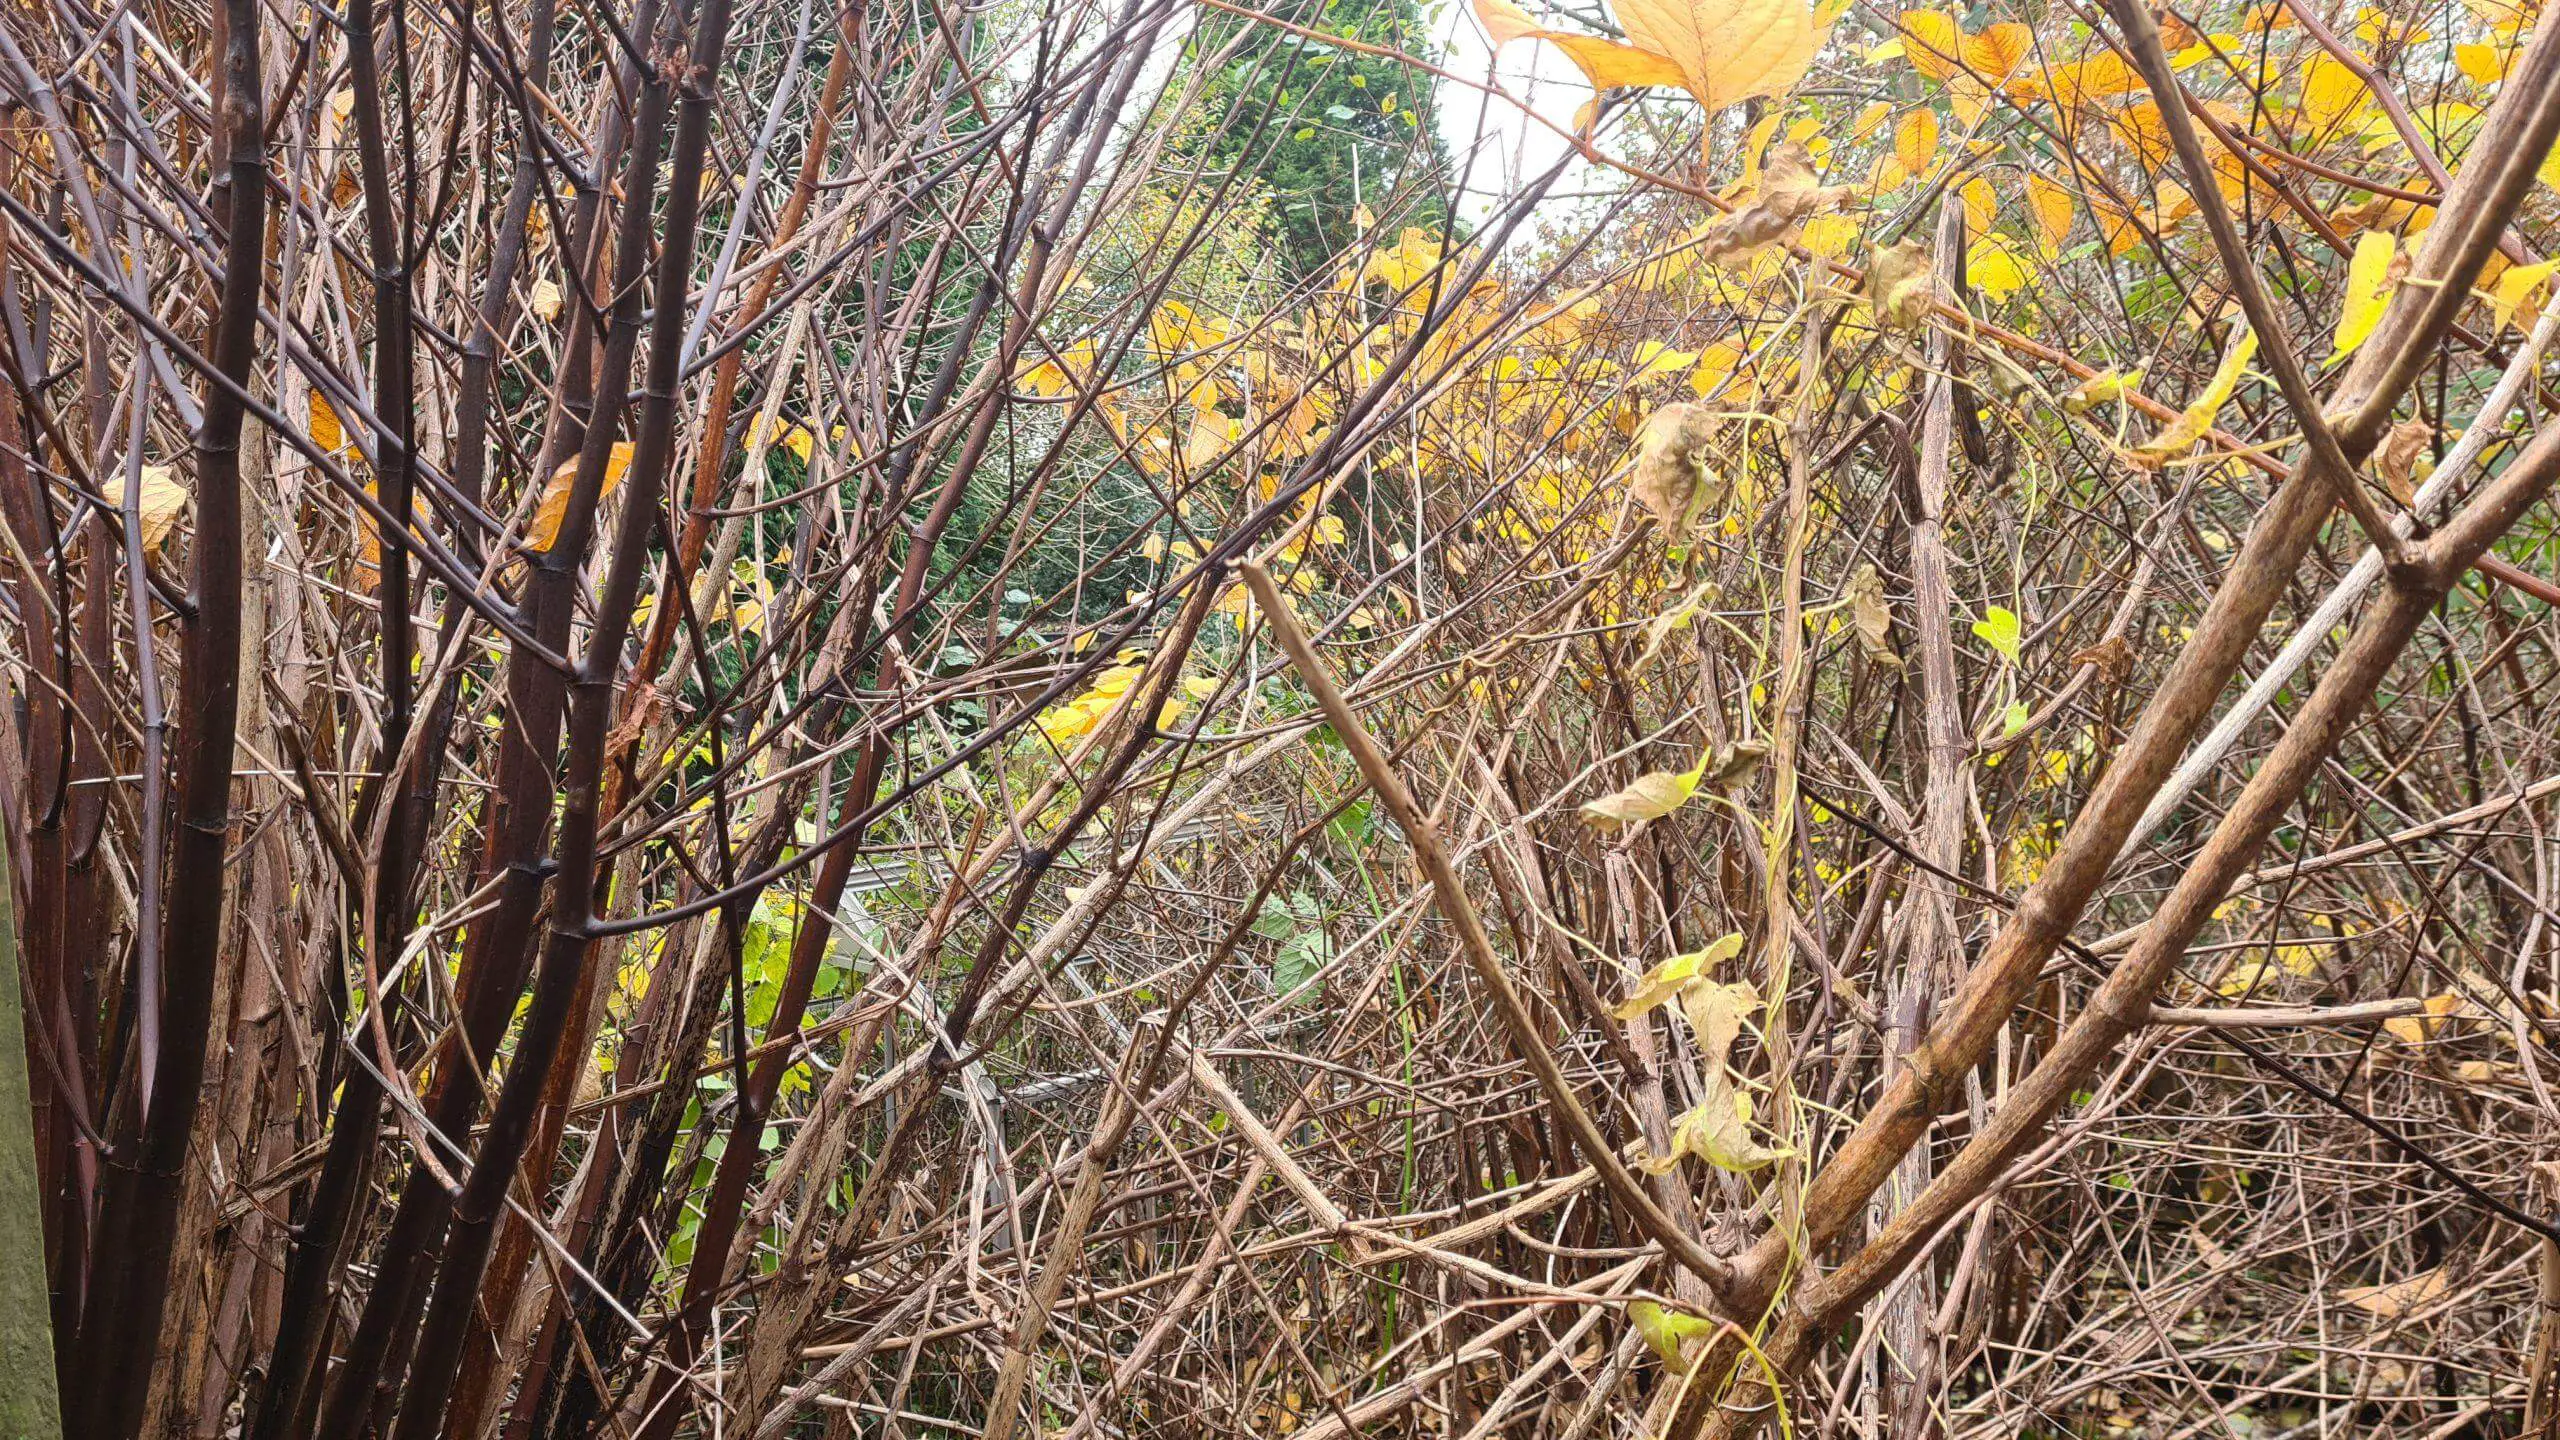 Removing Japanese knotweed off a property begins by cutting down the dead stems